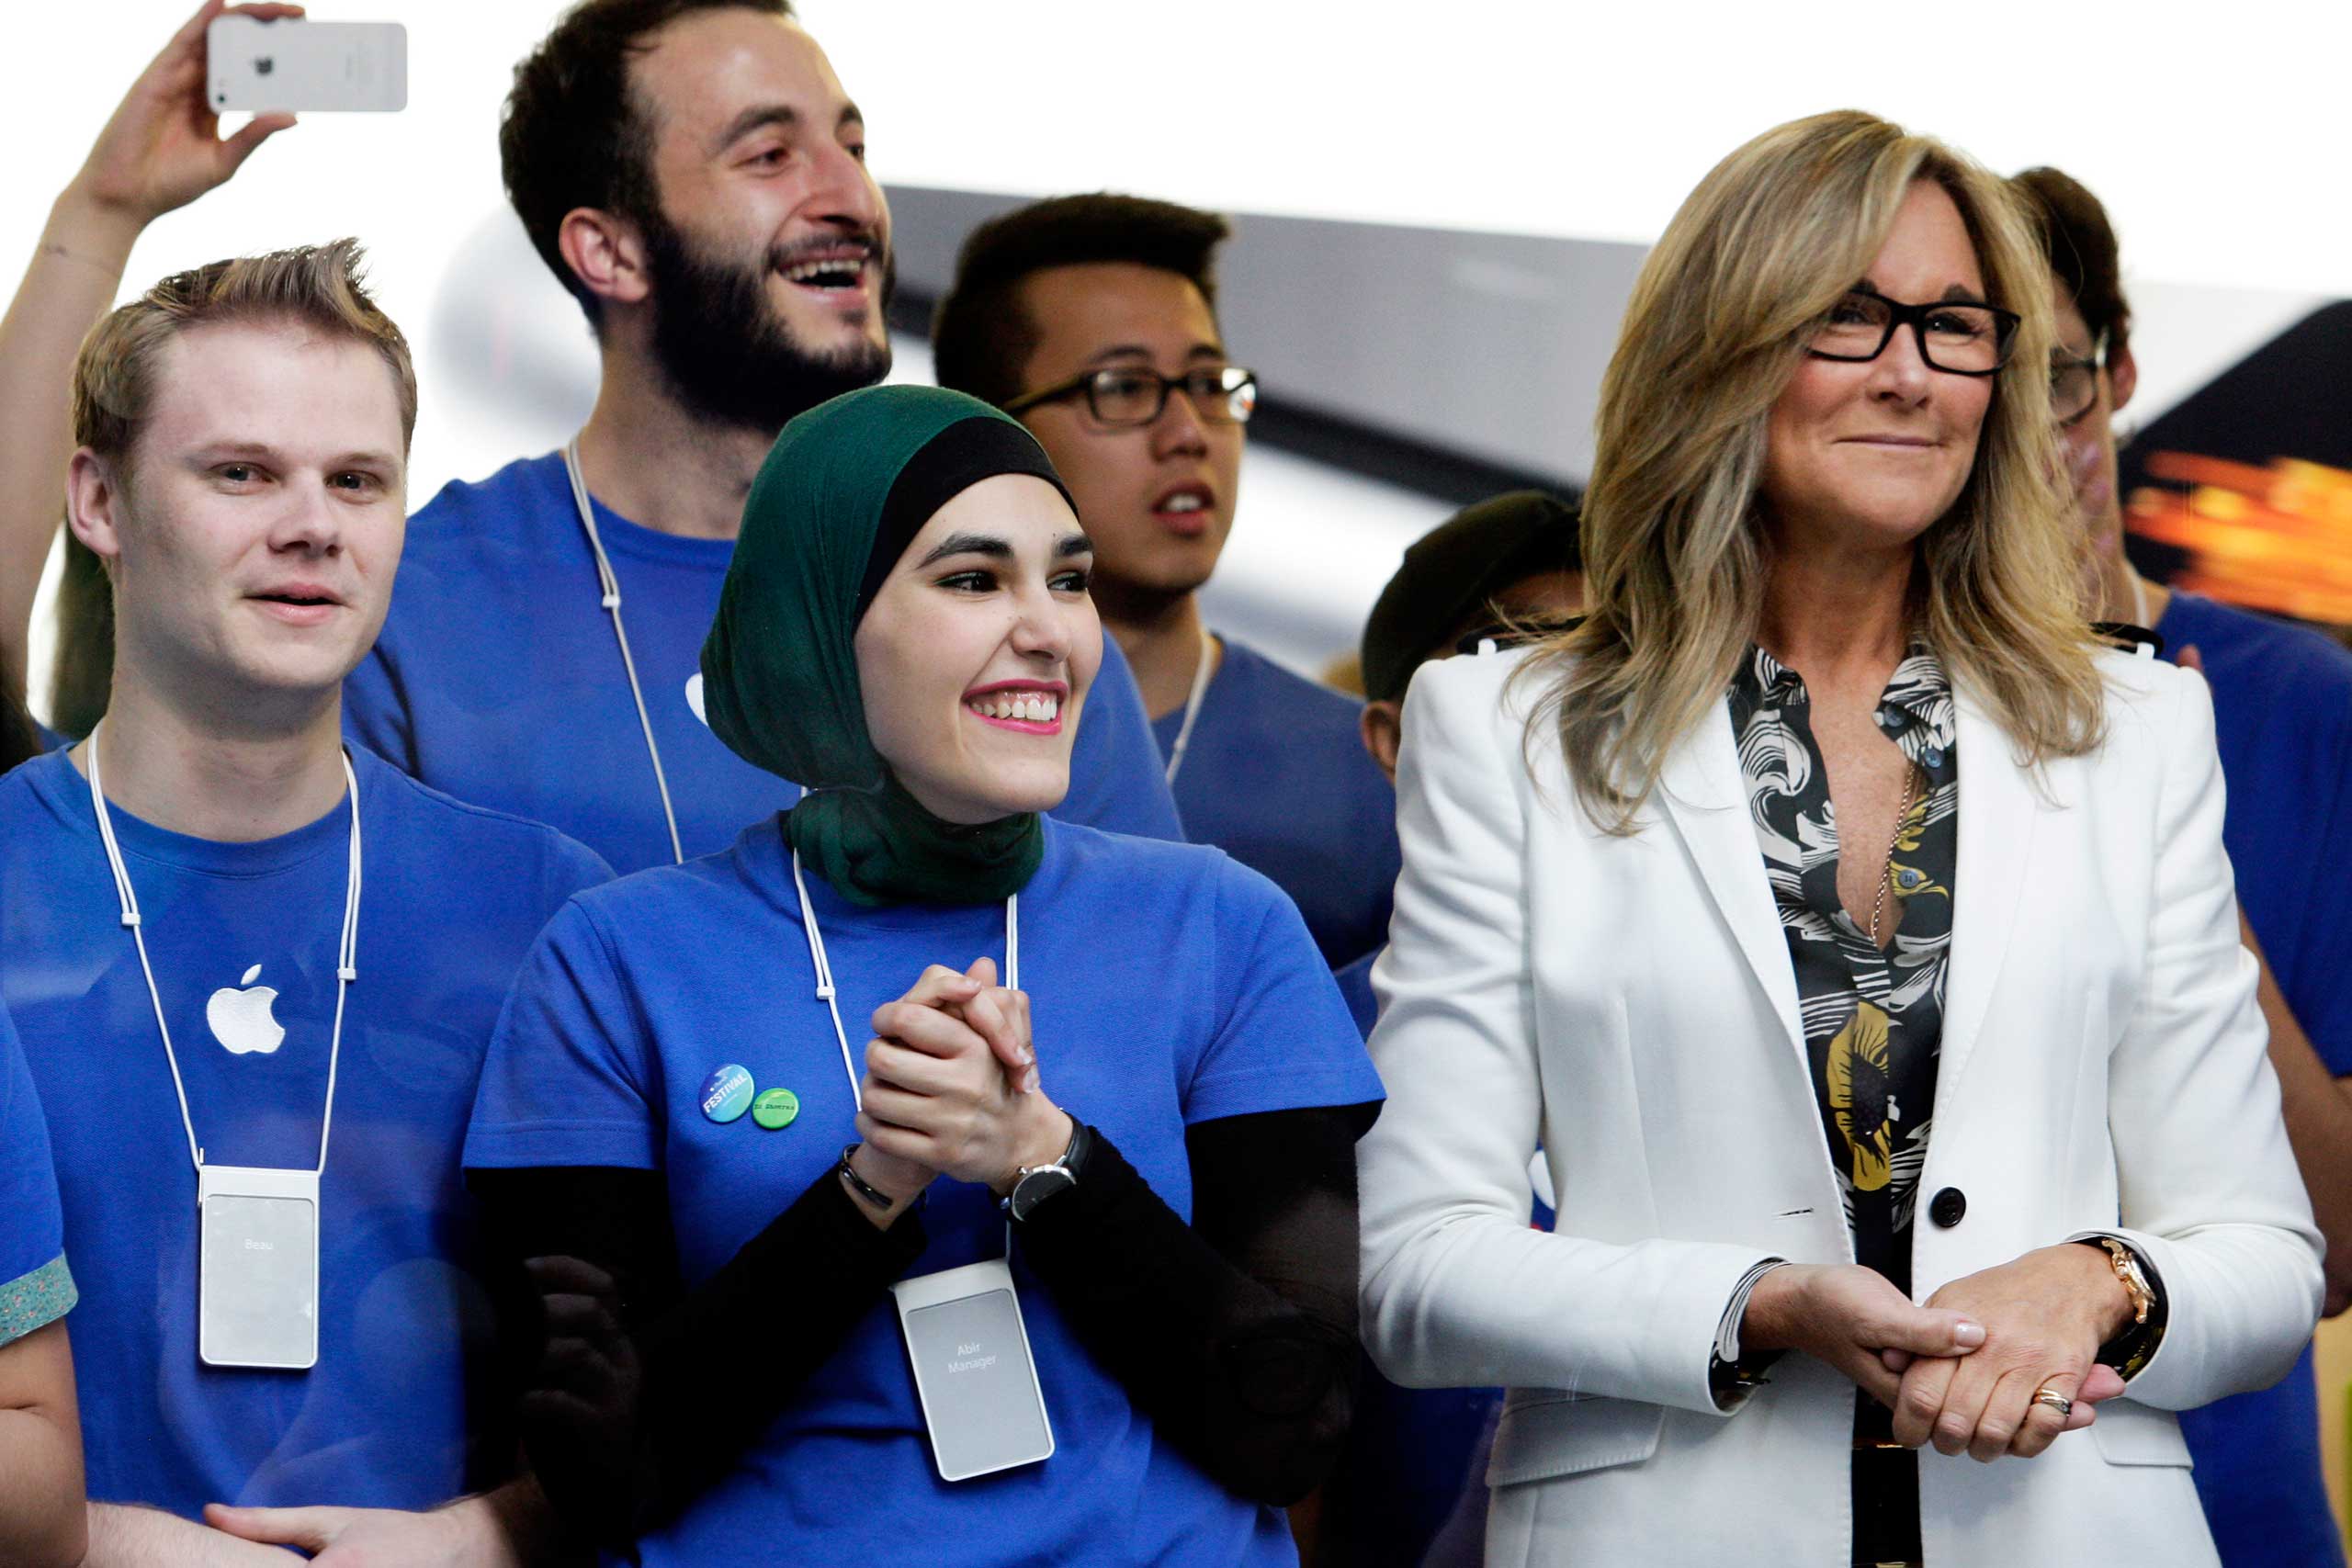 Angela Ahrendts, senior vice president of retail and online stores at Apple Inc., right, and employees look on before opening the doors to the company's George Street store for the sales launch of the iPhone 6 and iPhone 6 Plus in Sydney on Sept. 19, 2014. (Lisa Maree Williams—Bloomberg/Getty Images)